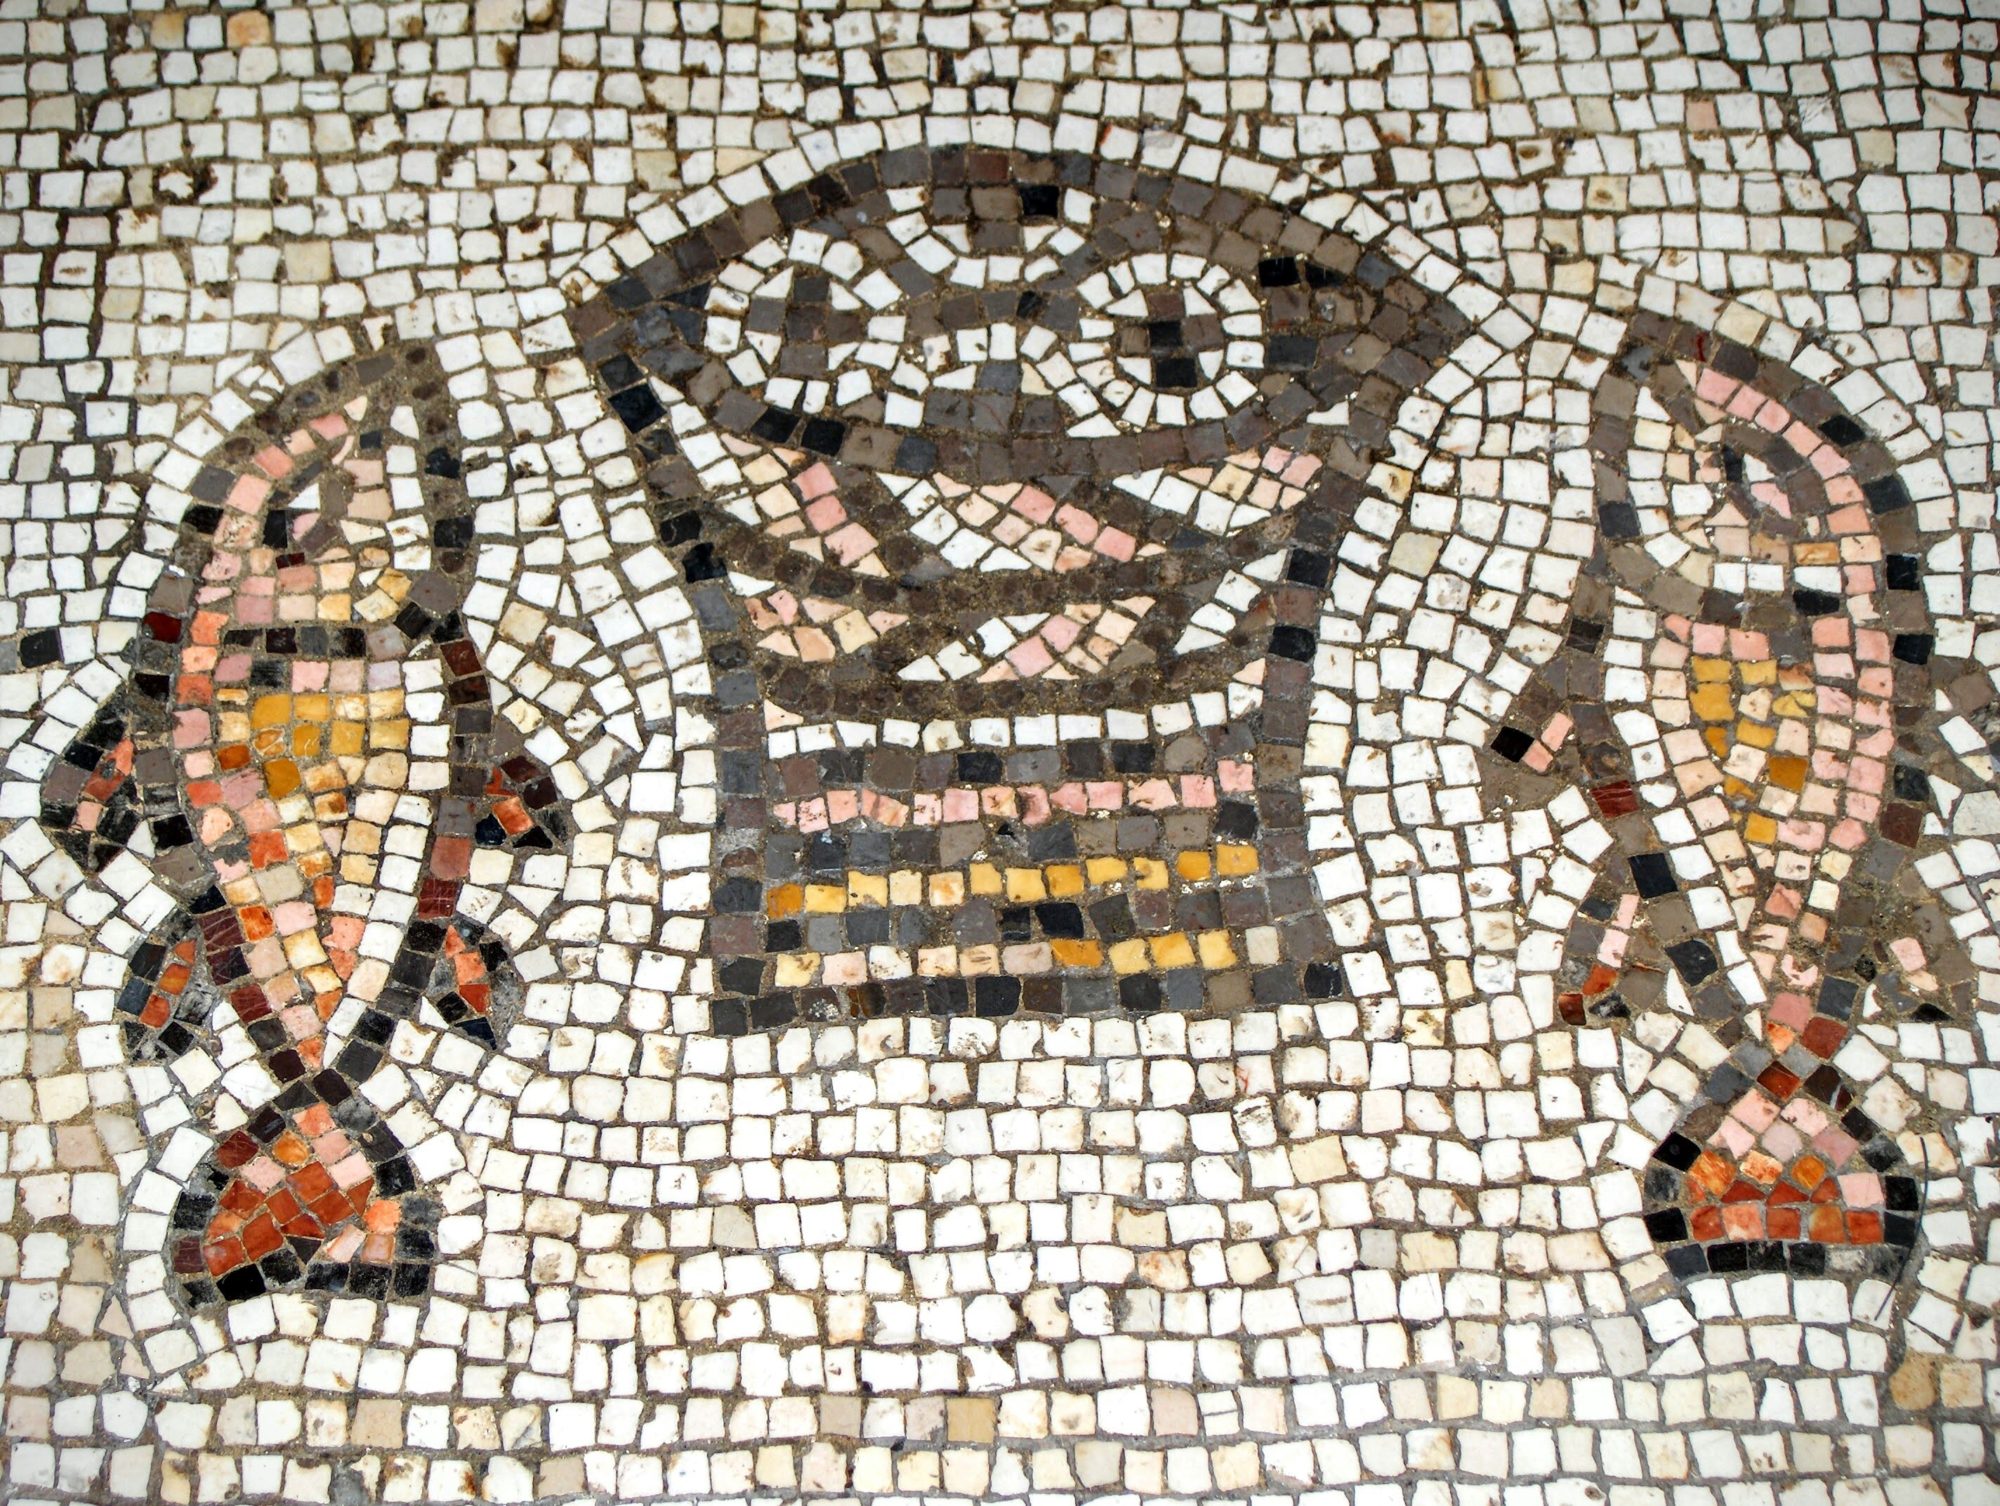 The famous mosaic of the fish and the loaves from the Church of the Multiplication in Tabgha